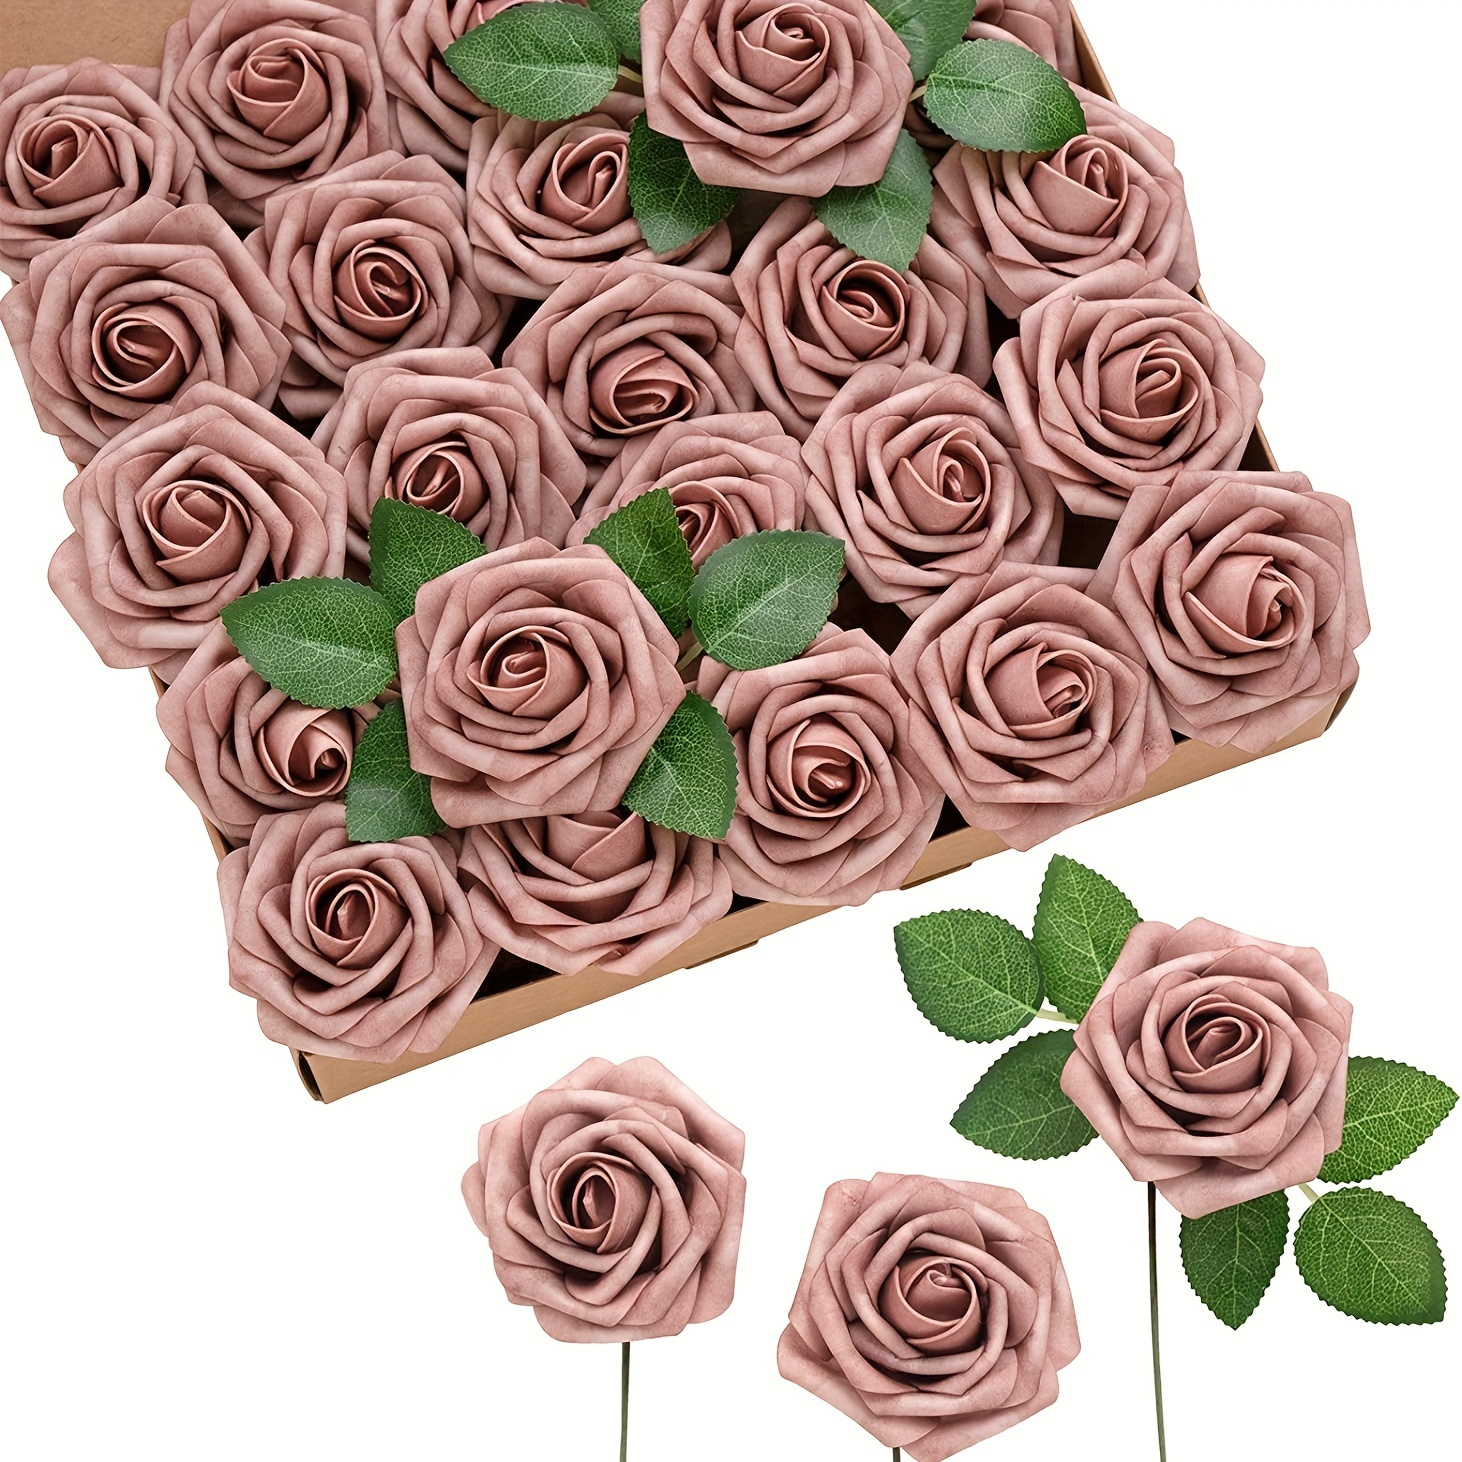 

25pcs, Retro Pink Artificial Roses, Retro Pink Simulation Flower, Real Touch Roses Arrangements, Scene Decor, Room Decor, Wedding Supplies, Wedding Favors, Valentine's Day Gifts, Birthday Gifts